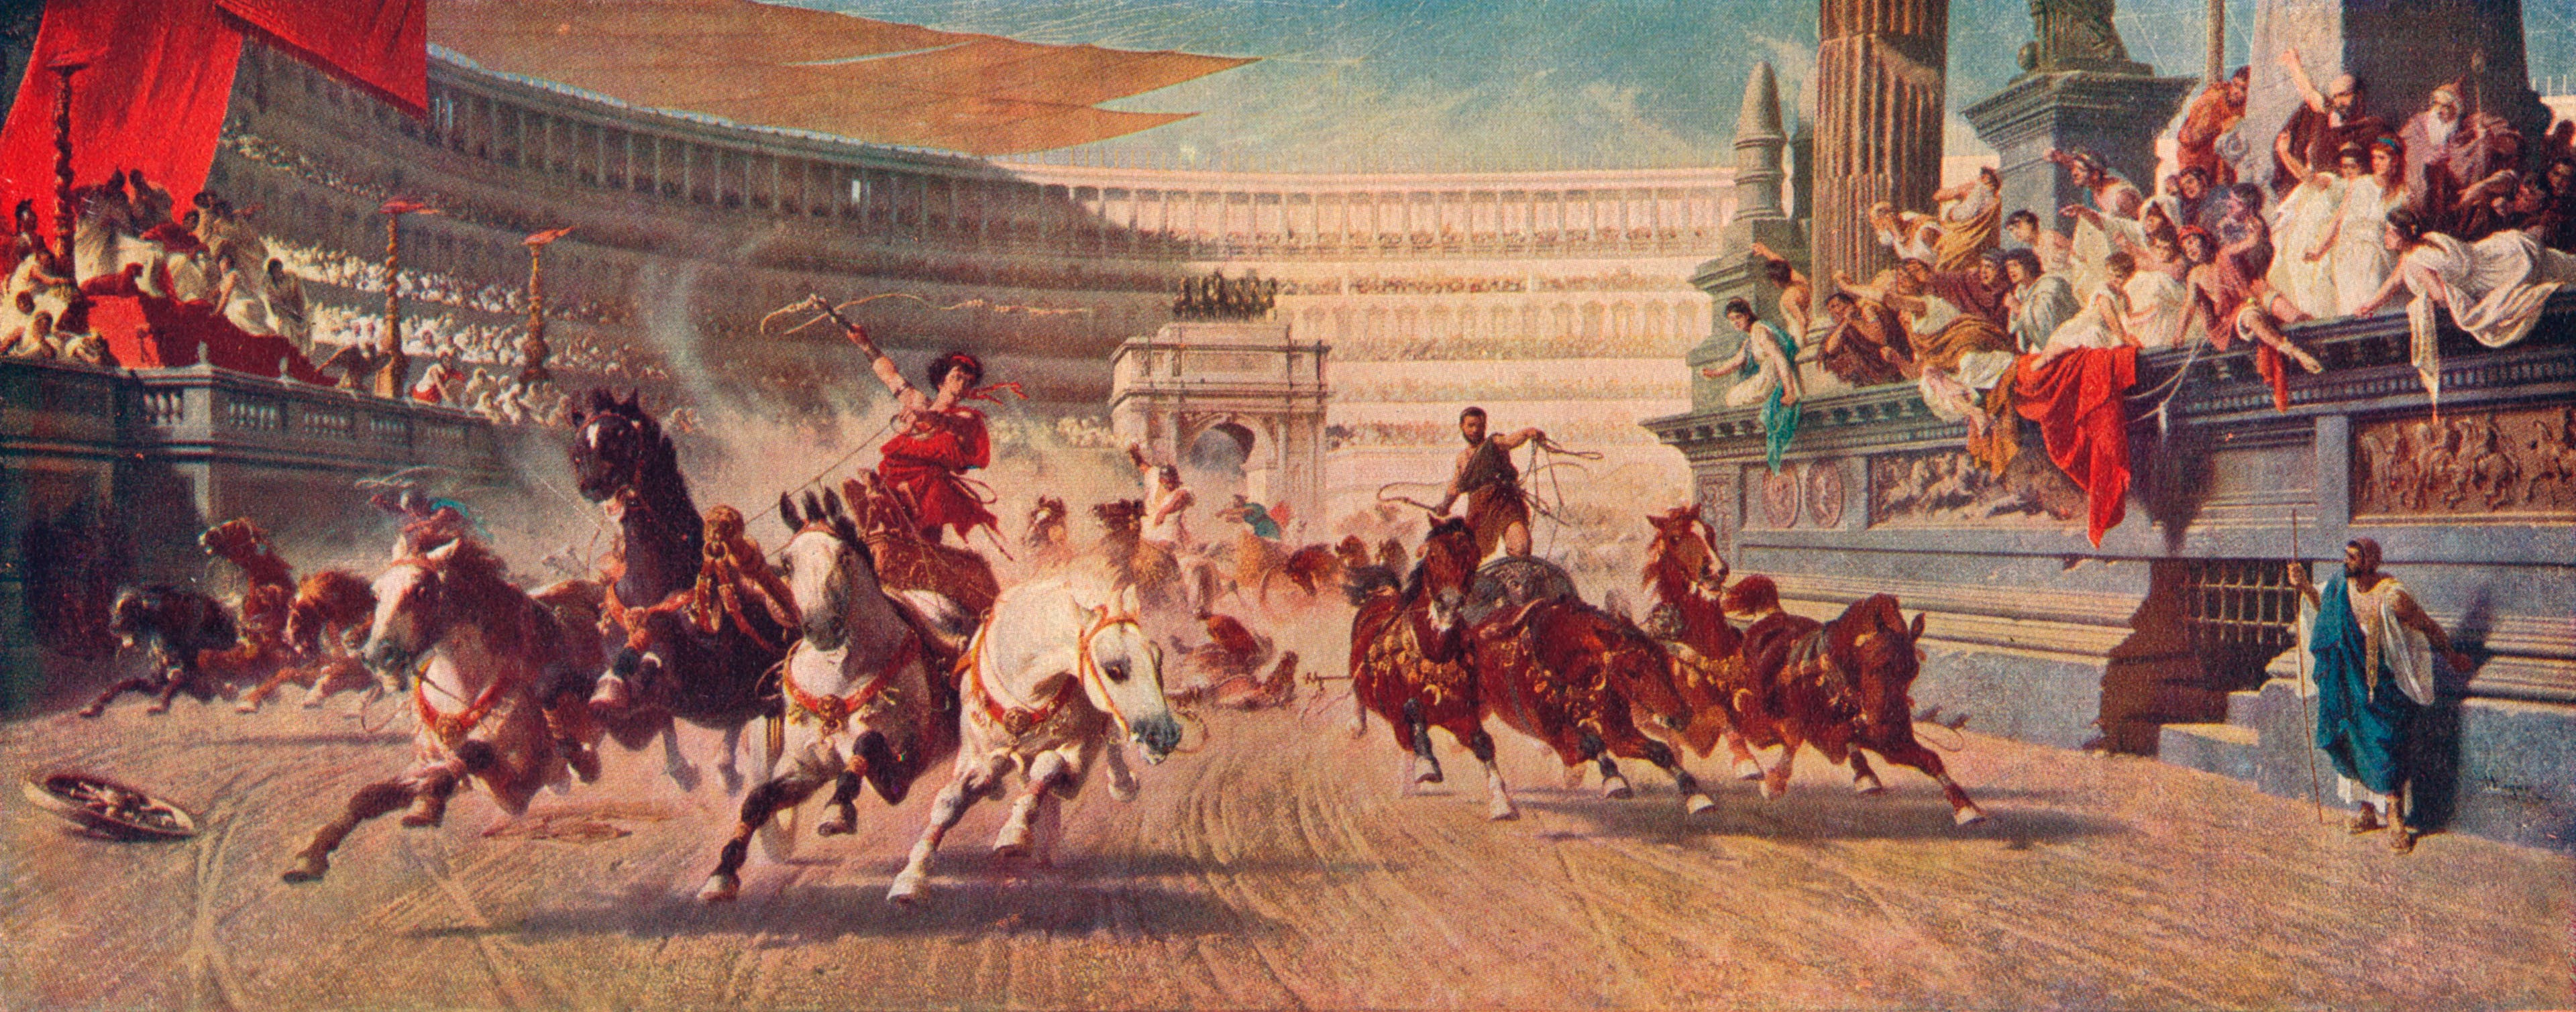 How the Dangerous Sport of Chariot Racing Captivated Ancient Rome